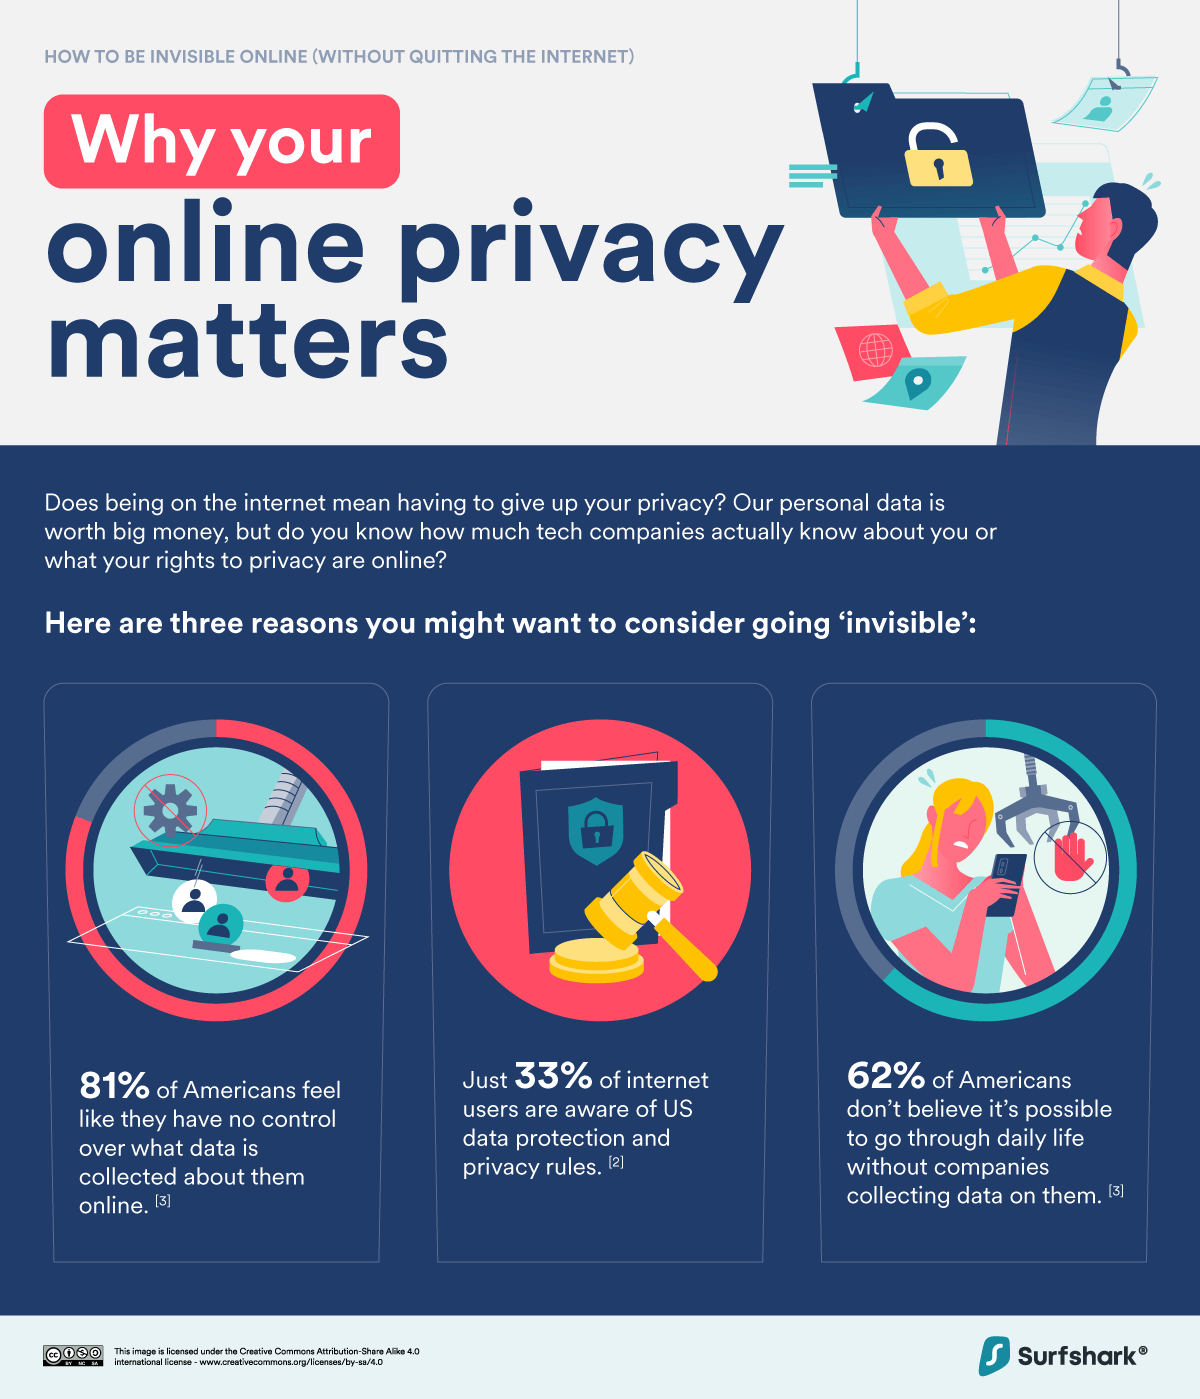 https://surfshark.com/wp-content/themes/surfshark/assets/img/agency/online-privacy/01_How-to-Be-Invisible-Online_Privacy.20ebd34b.png